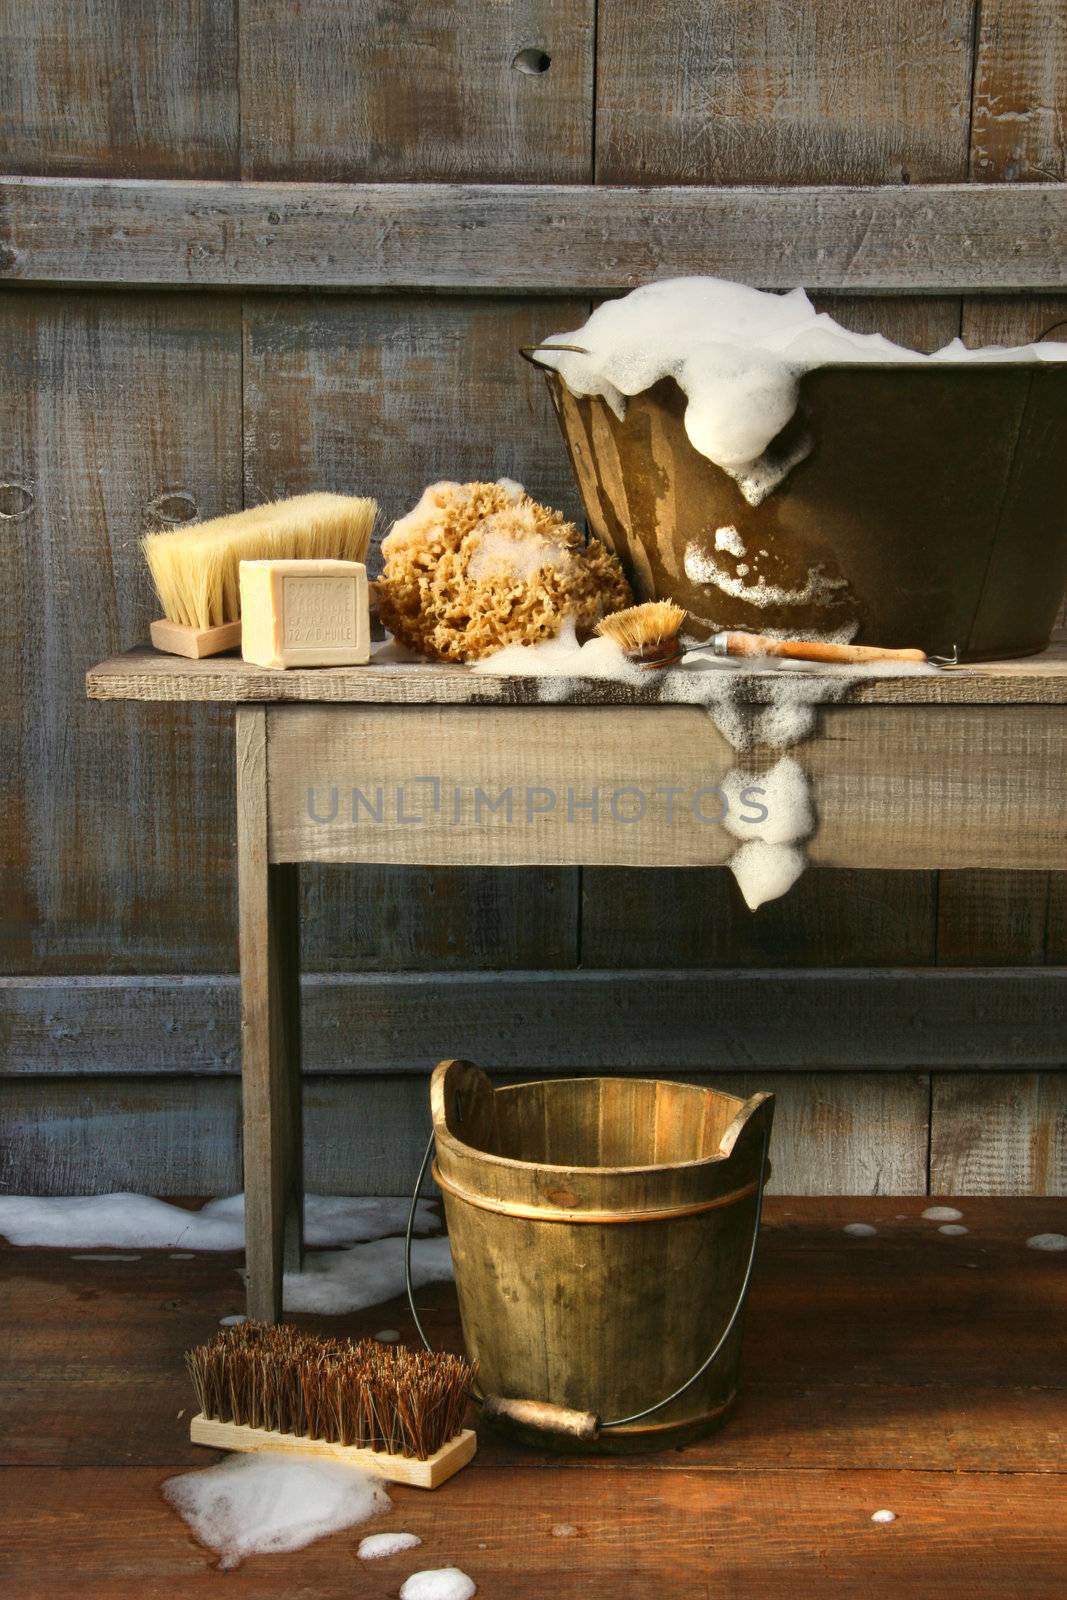 Old wash tub with soap and scrub brushes by Sandralise